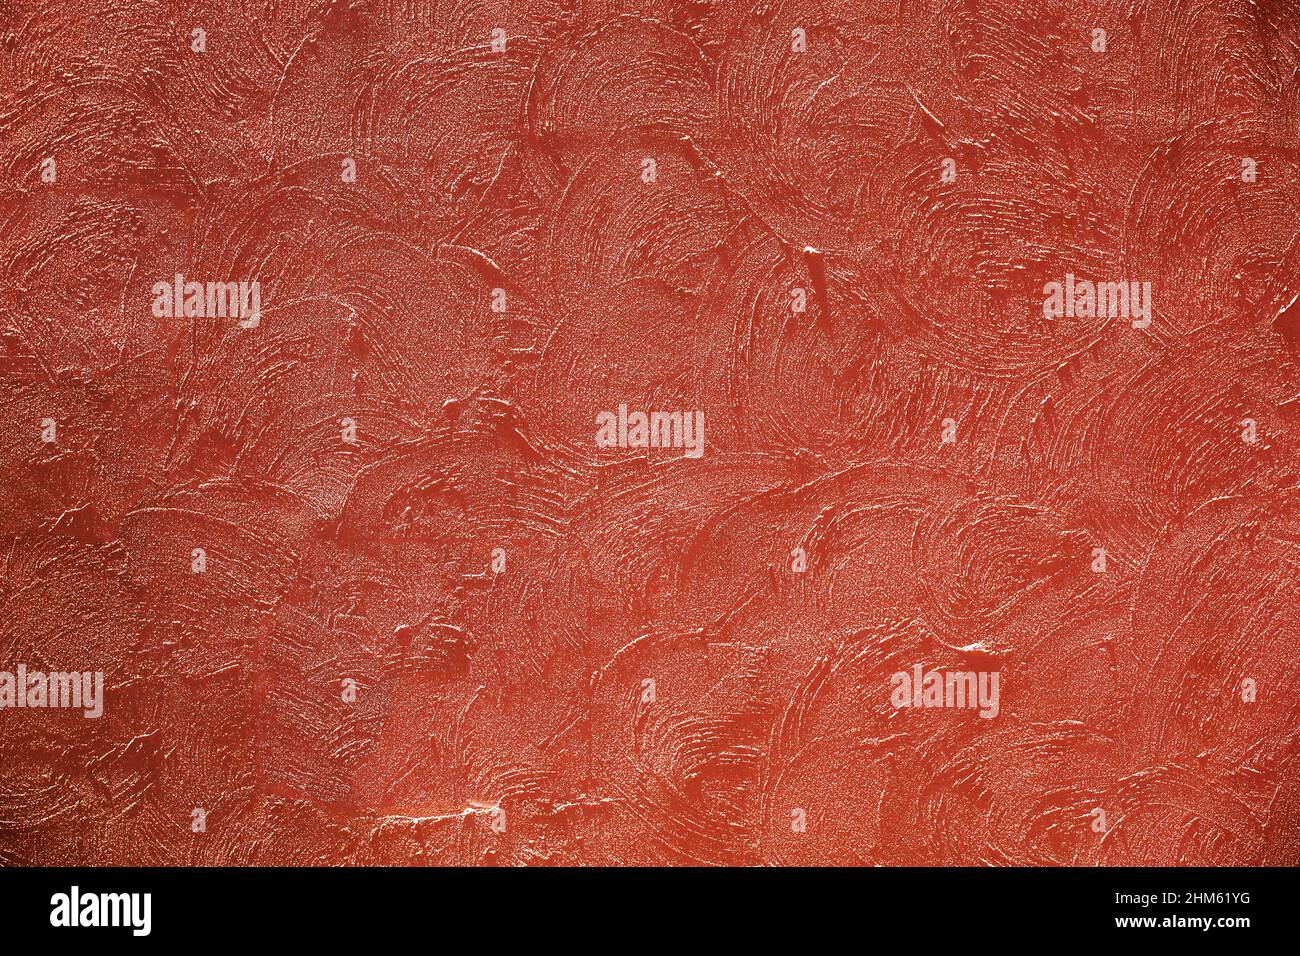 Photograph for background material taken from the front of a terracotta color plaster wall Stock Photo